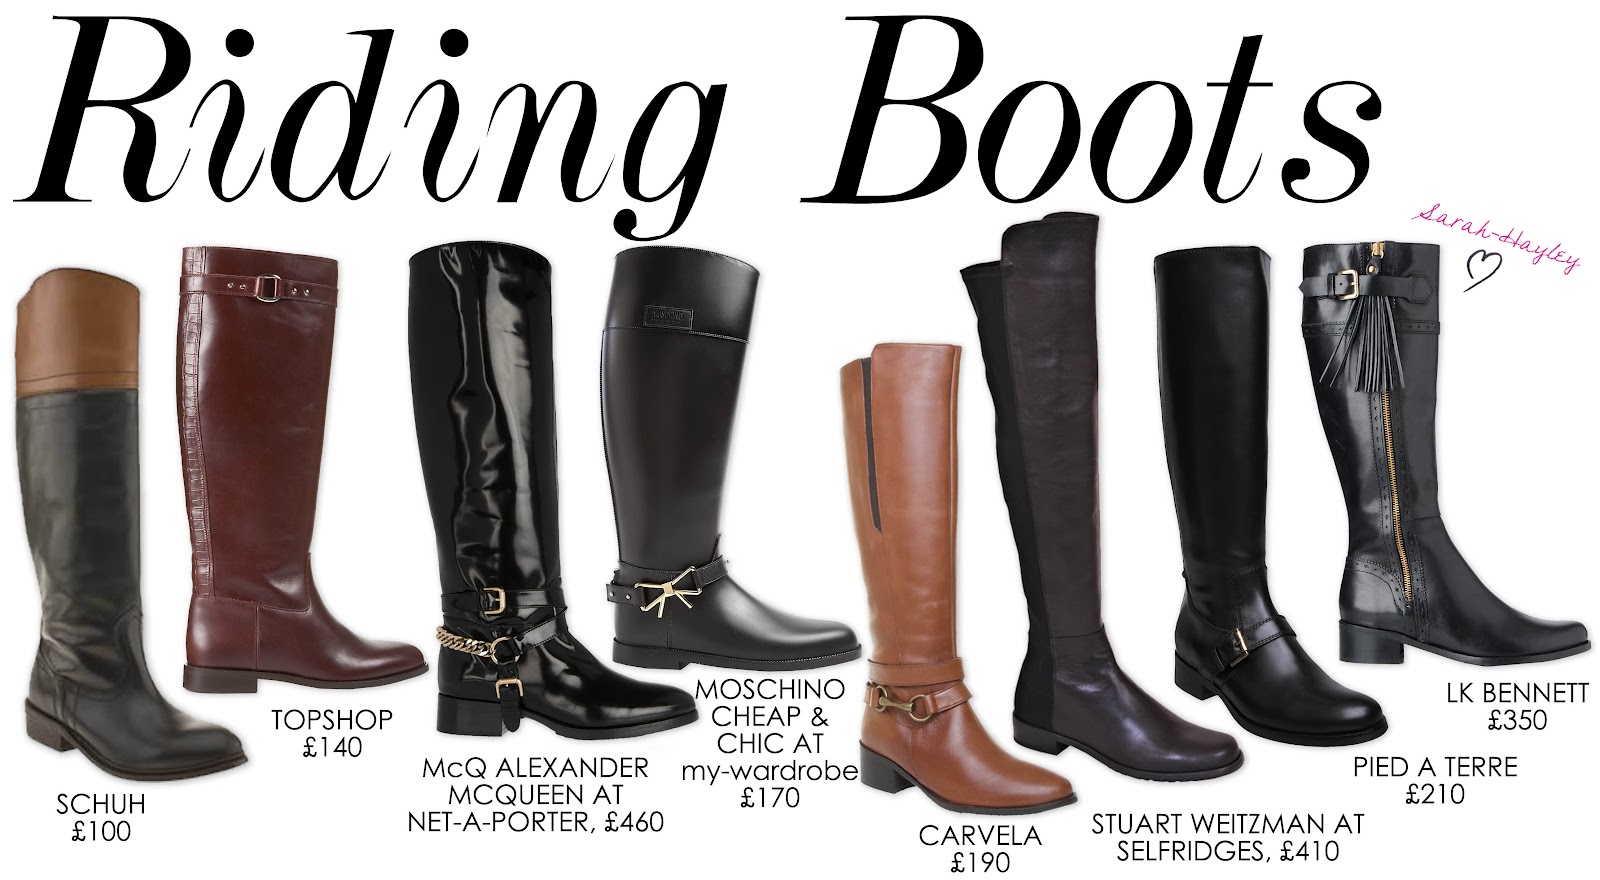 AW12 Trend - Riding Boots - by Sarah-Hayley Owen